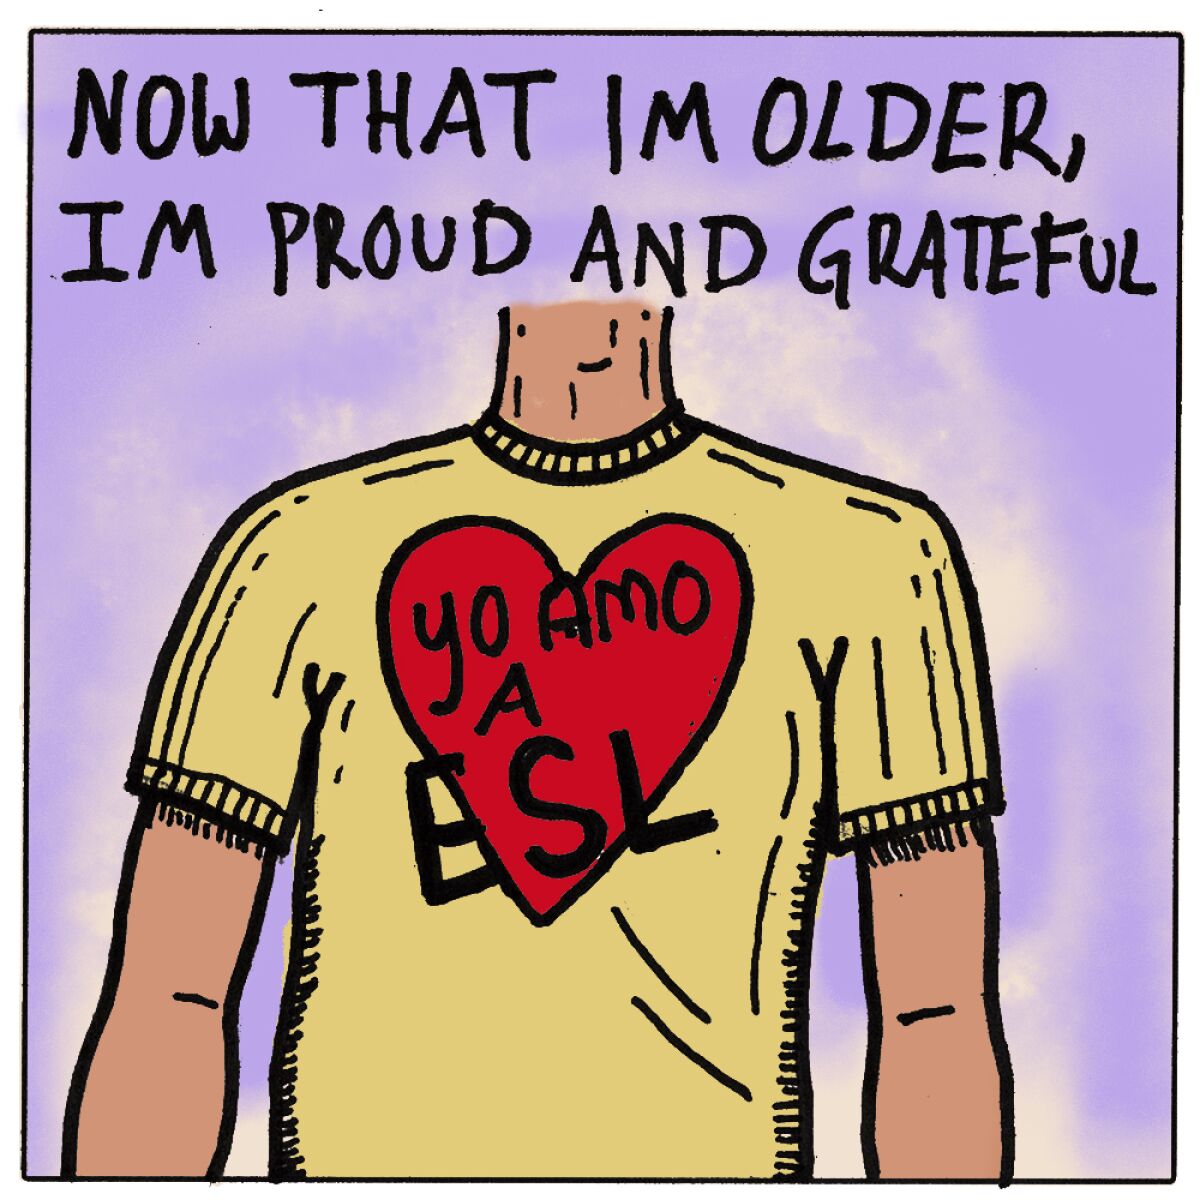 Now that I'm older, I'm proud and grateful 